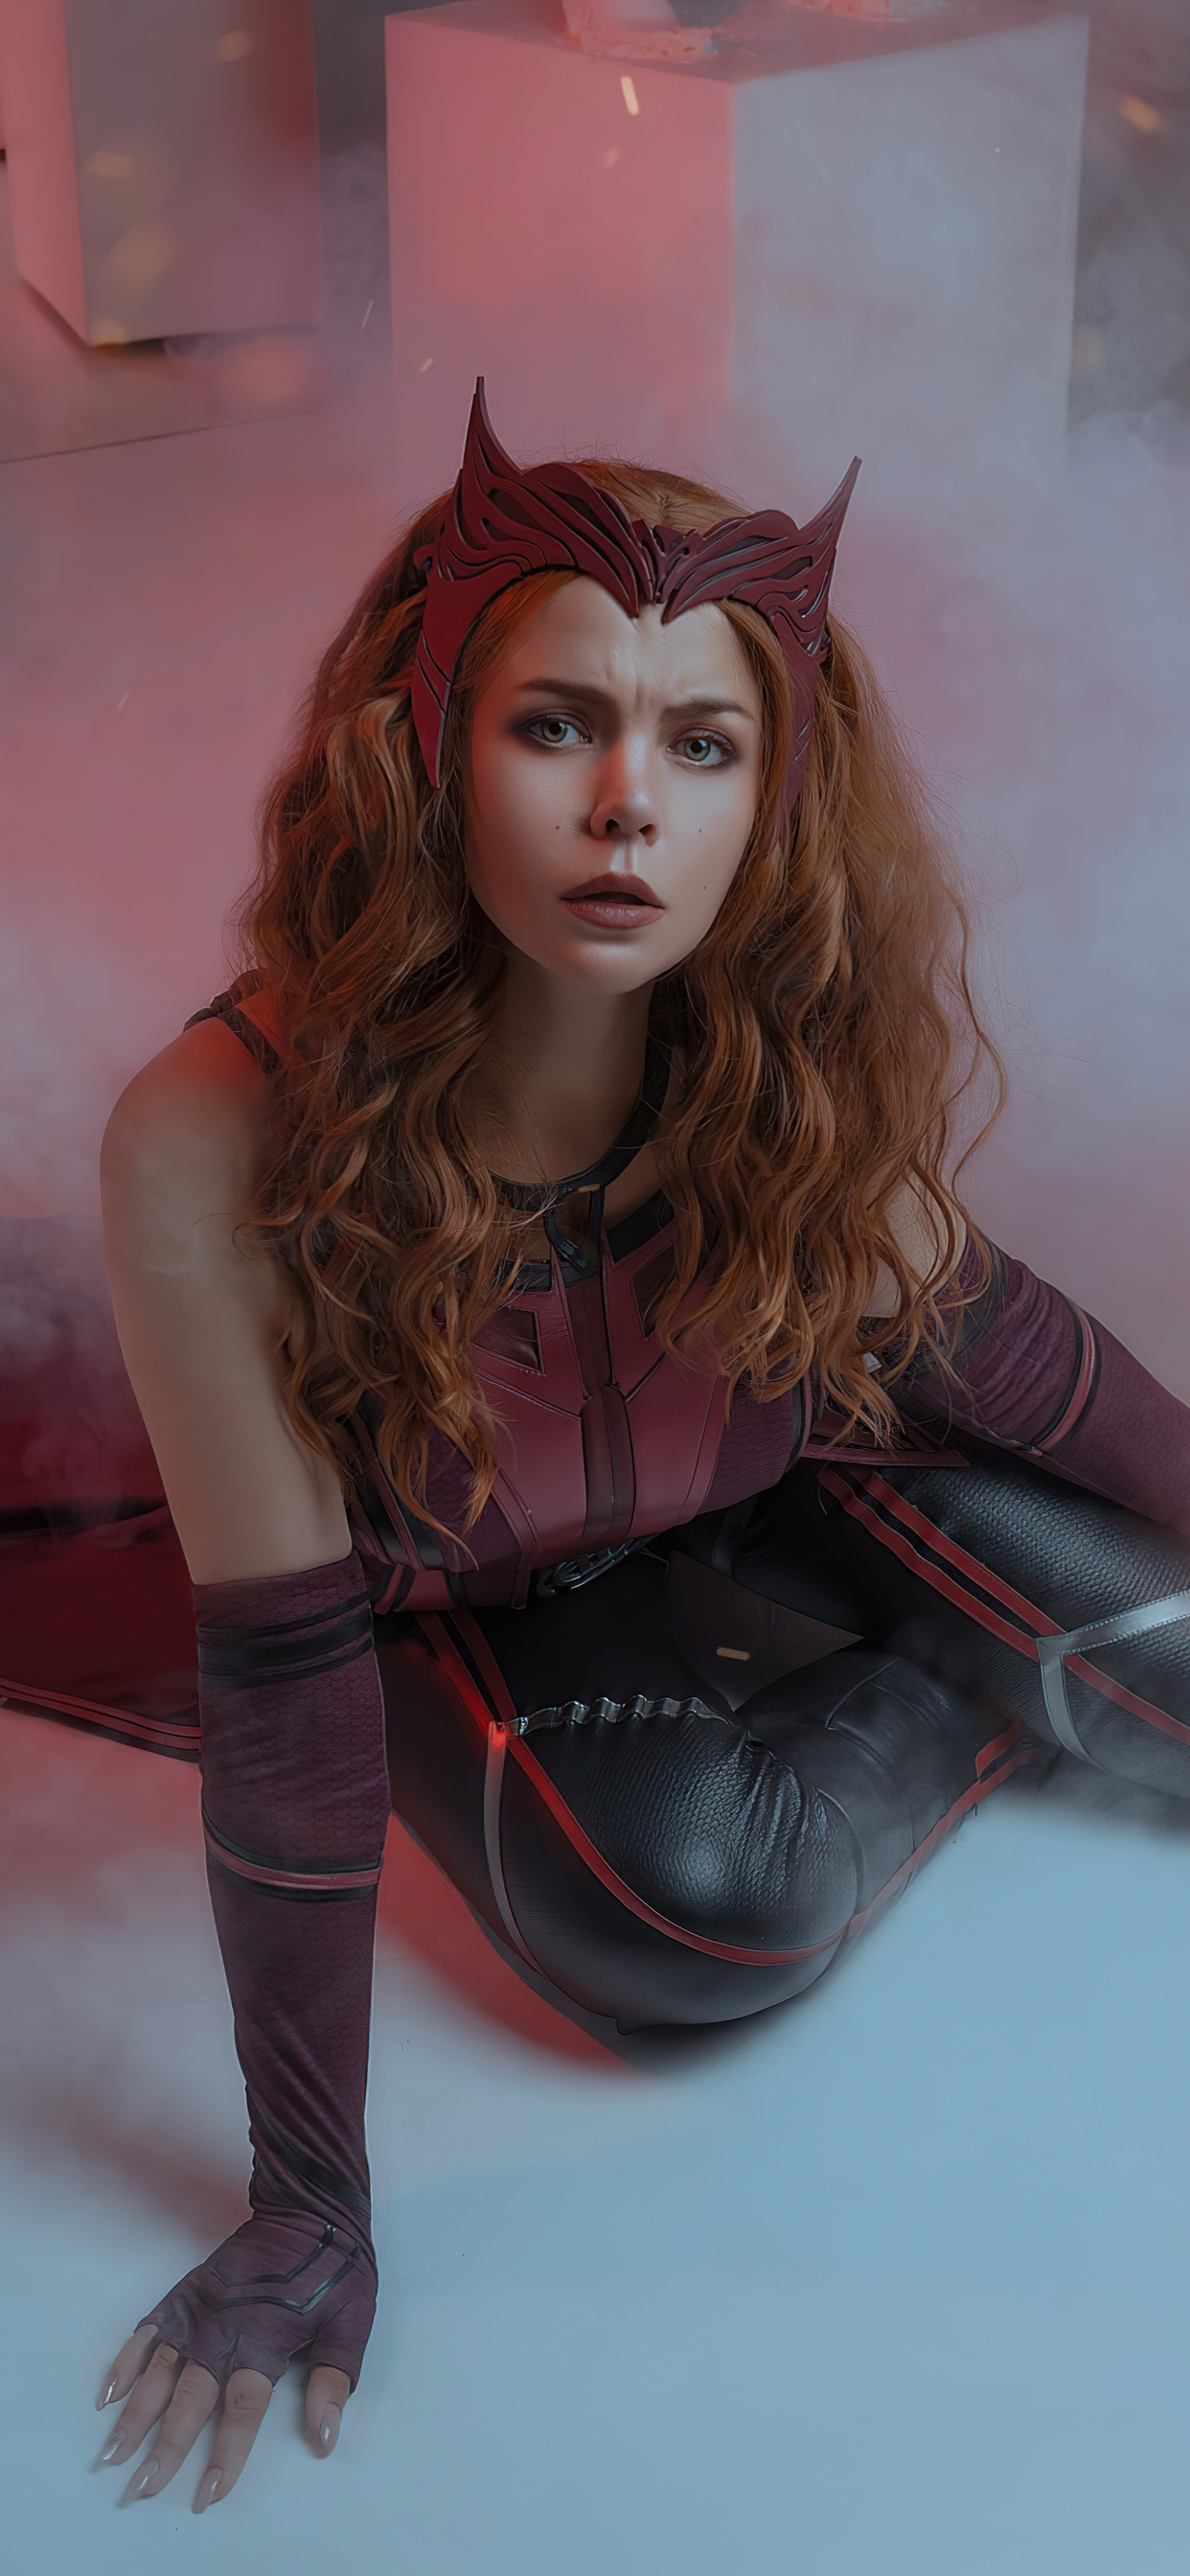 scarlet-witch-cosplay-2021-4c.jpg